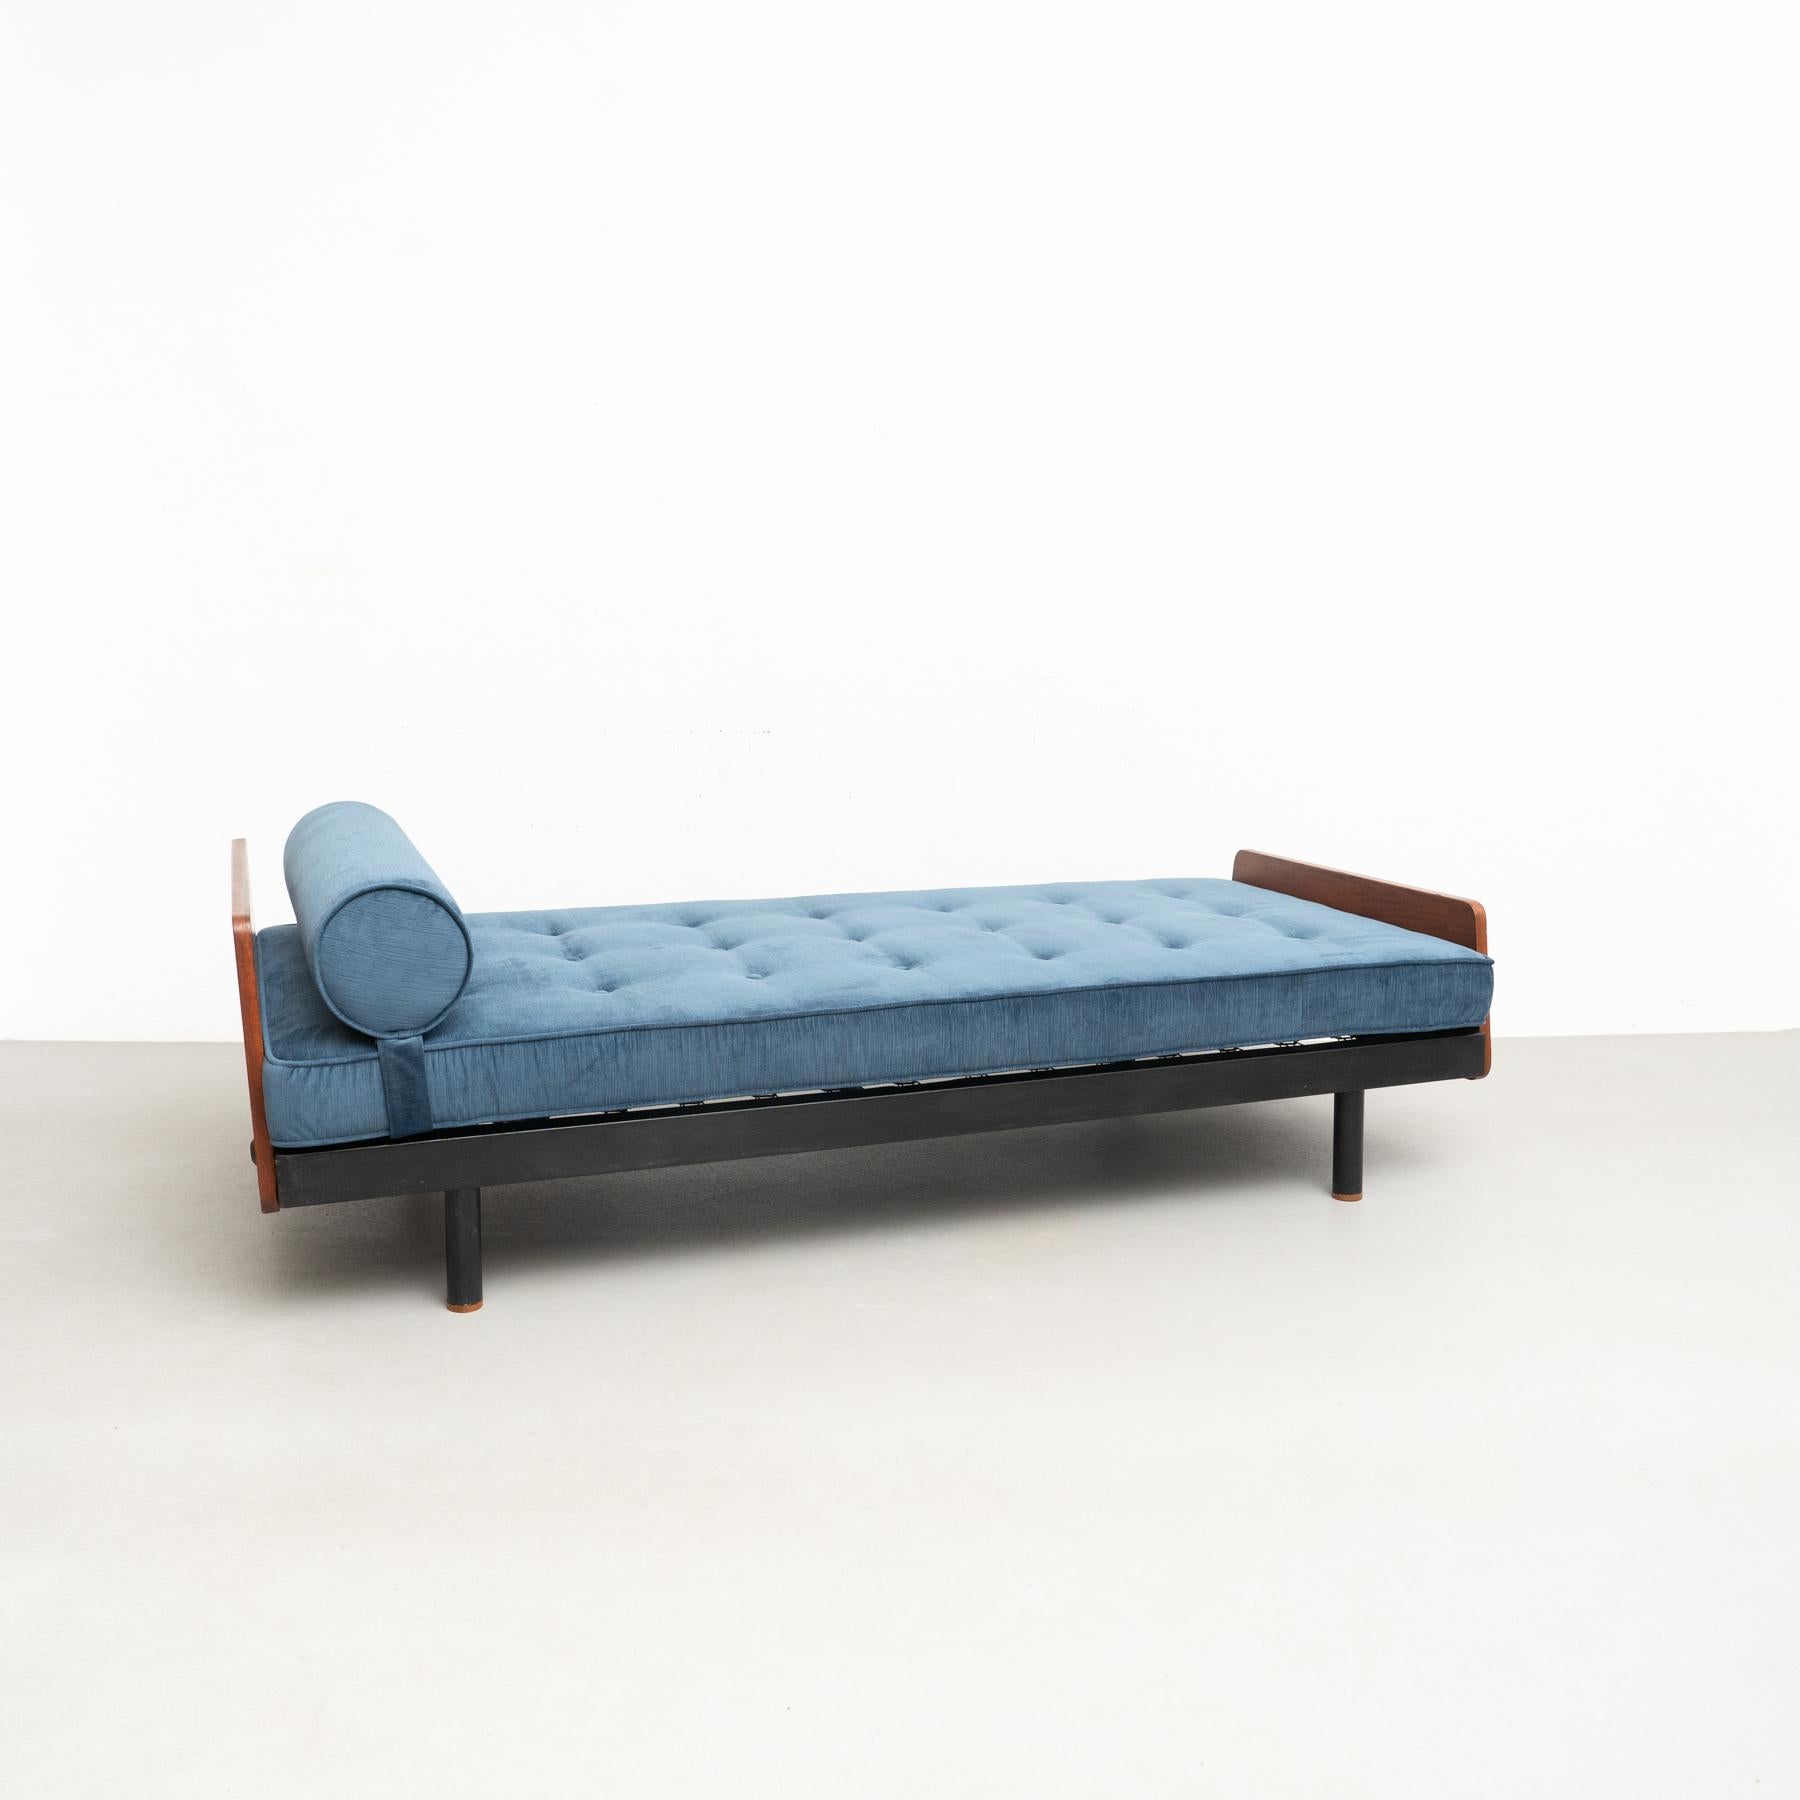 Metal Jean Prouve Mid-Century Modern S.C.A.L. Daybed, circa 1950